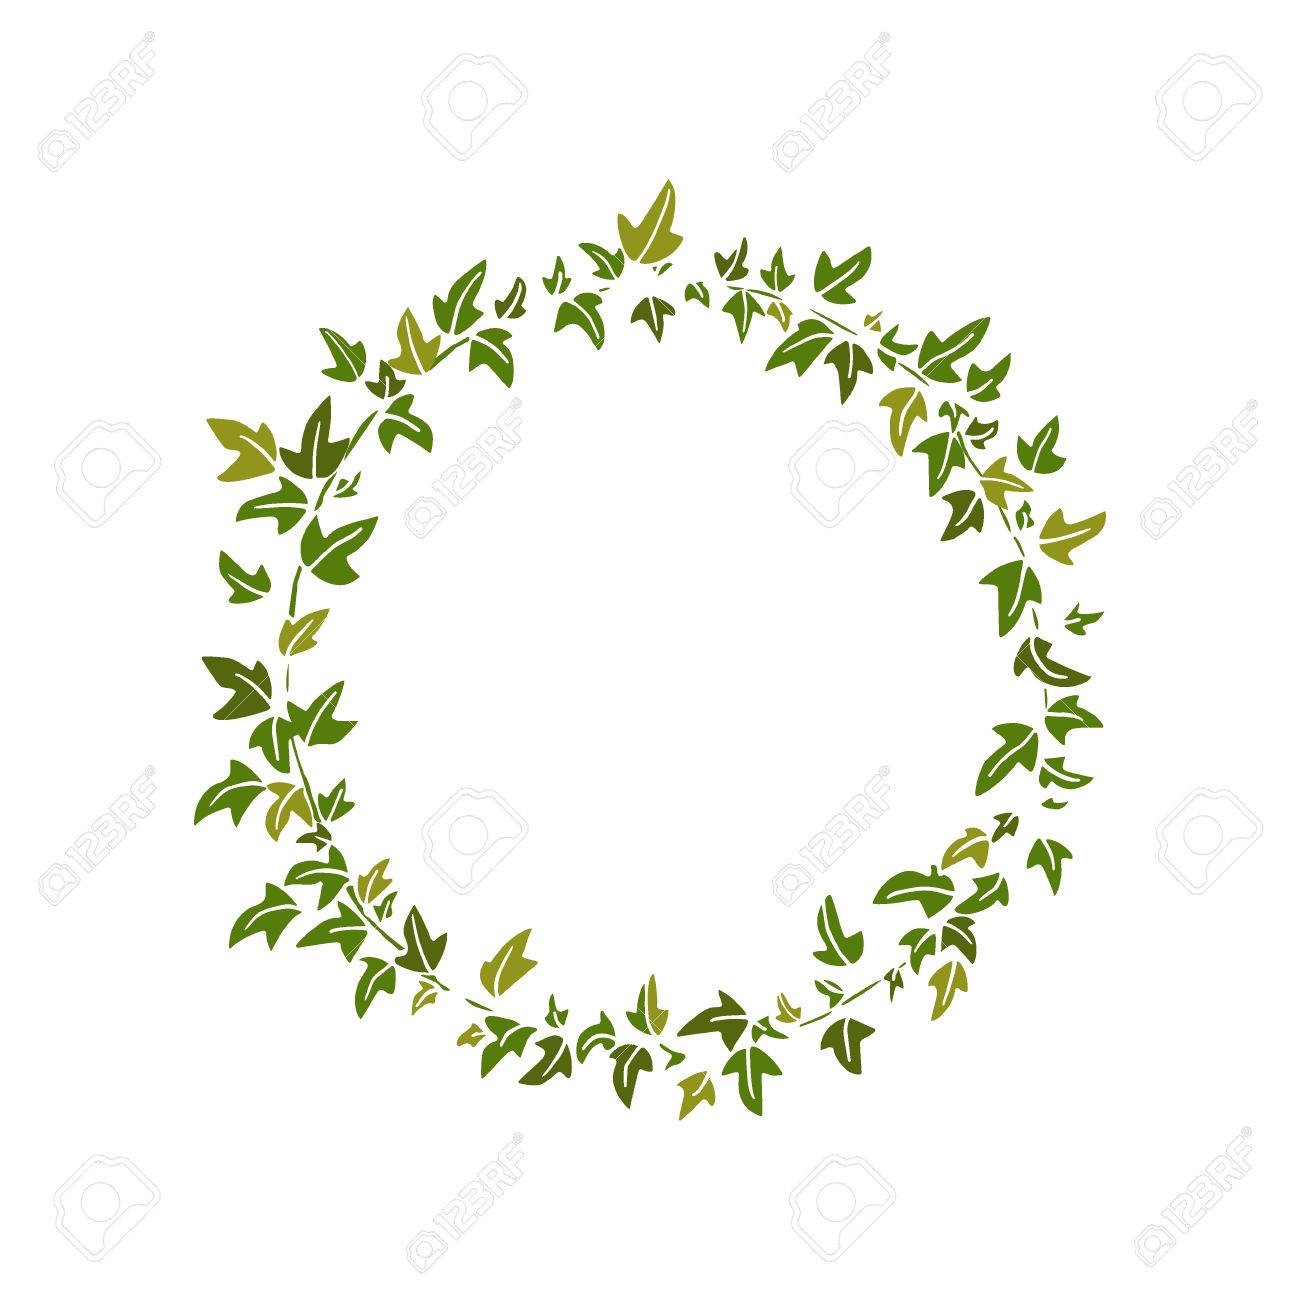 English ivy wreath » Clipart Station.